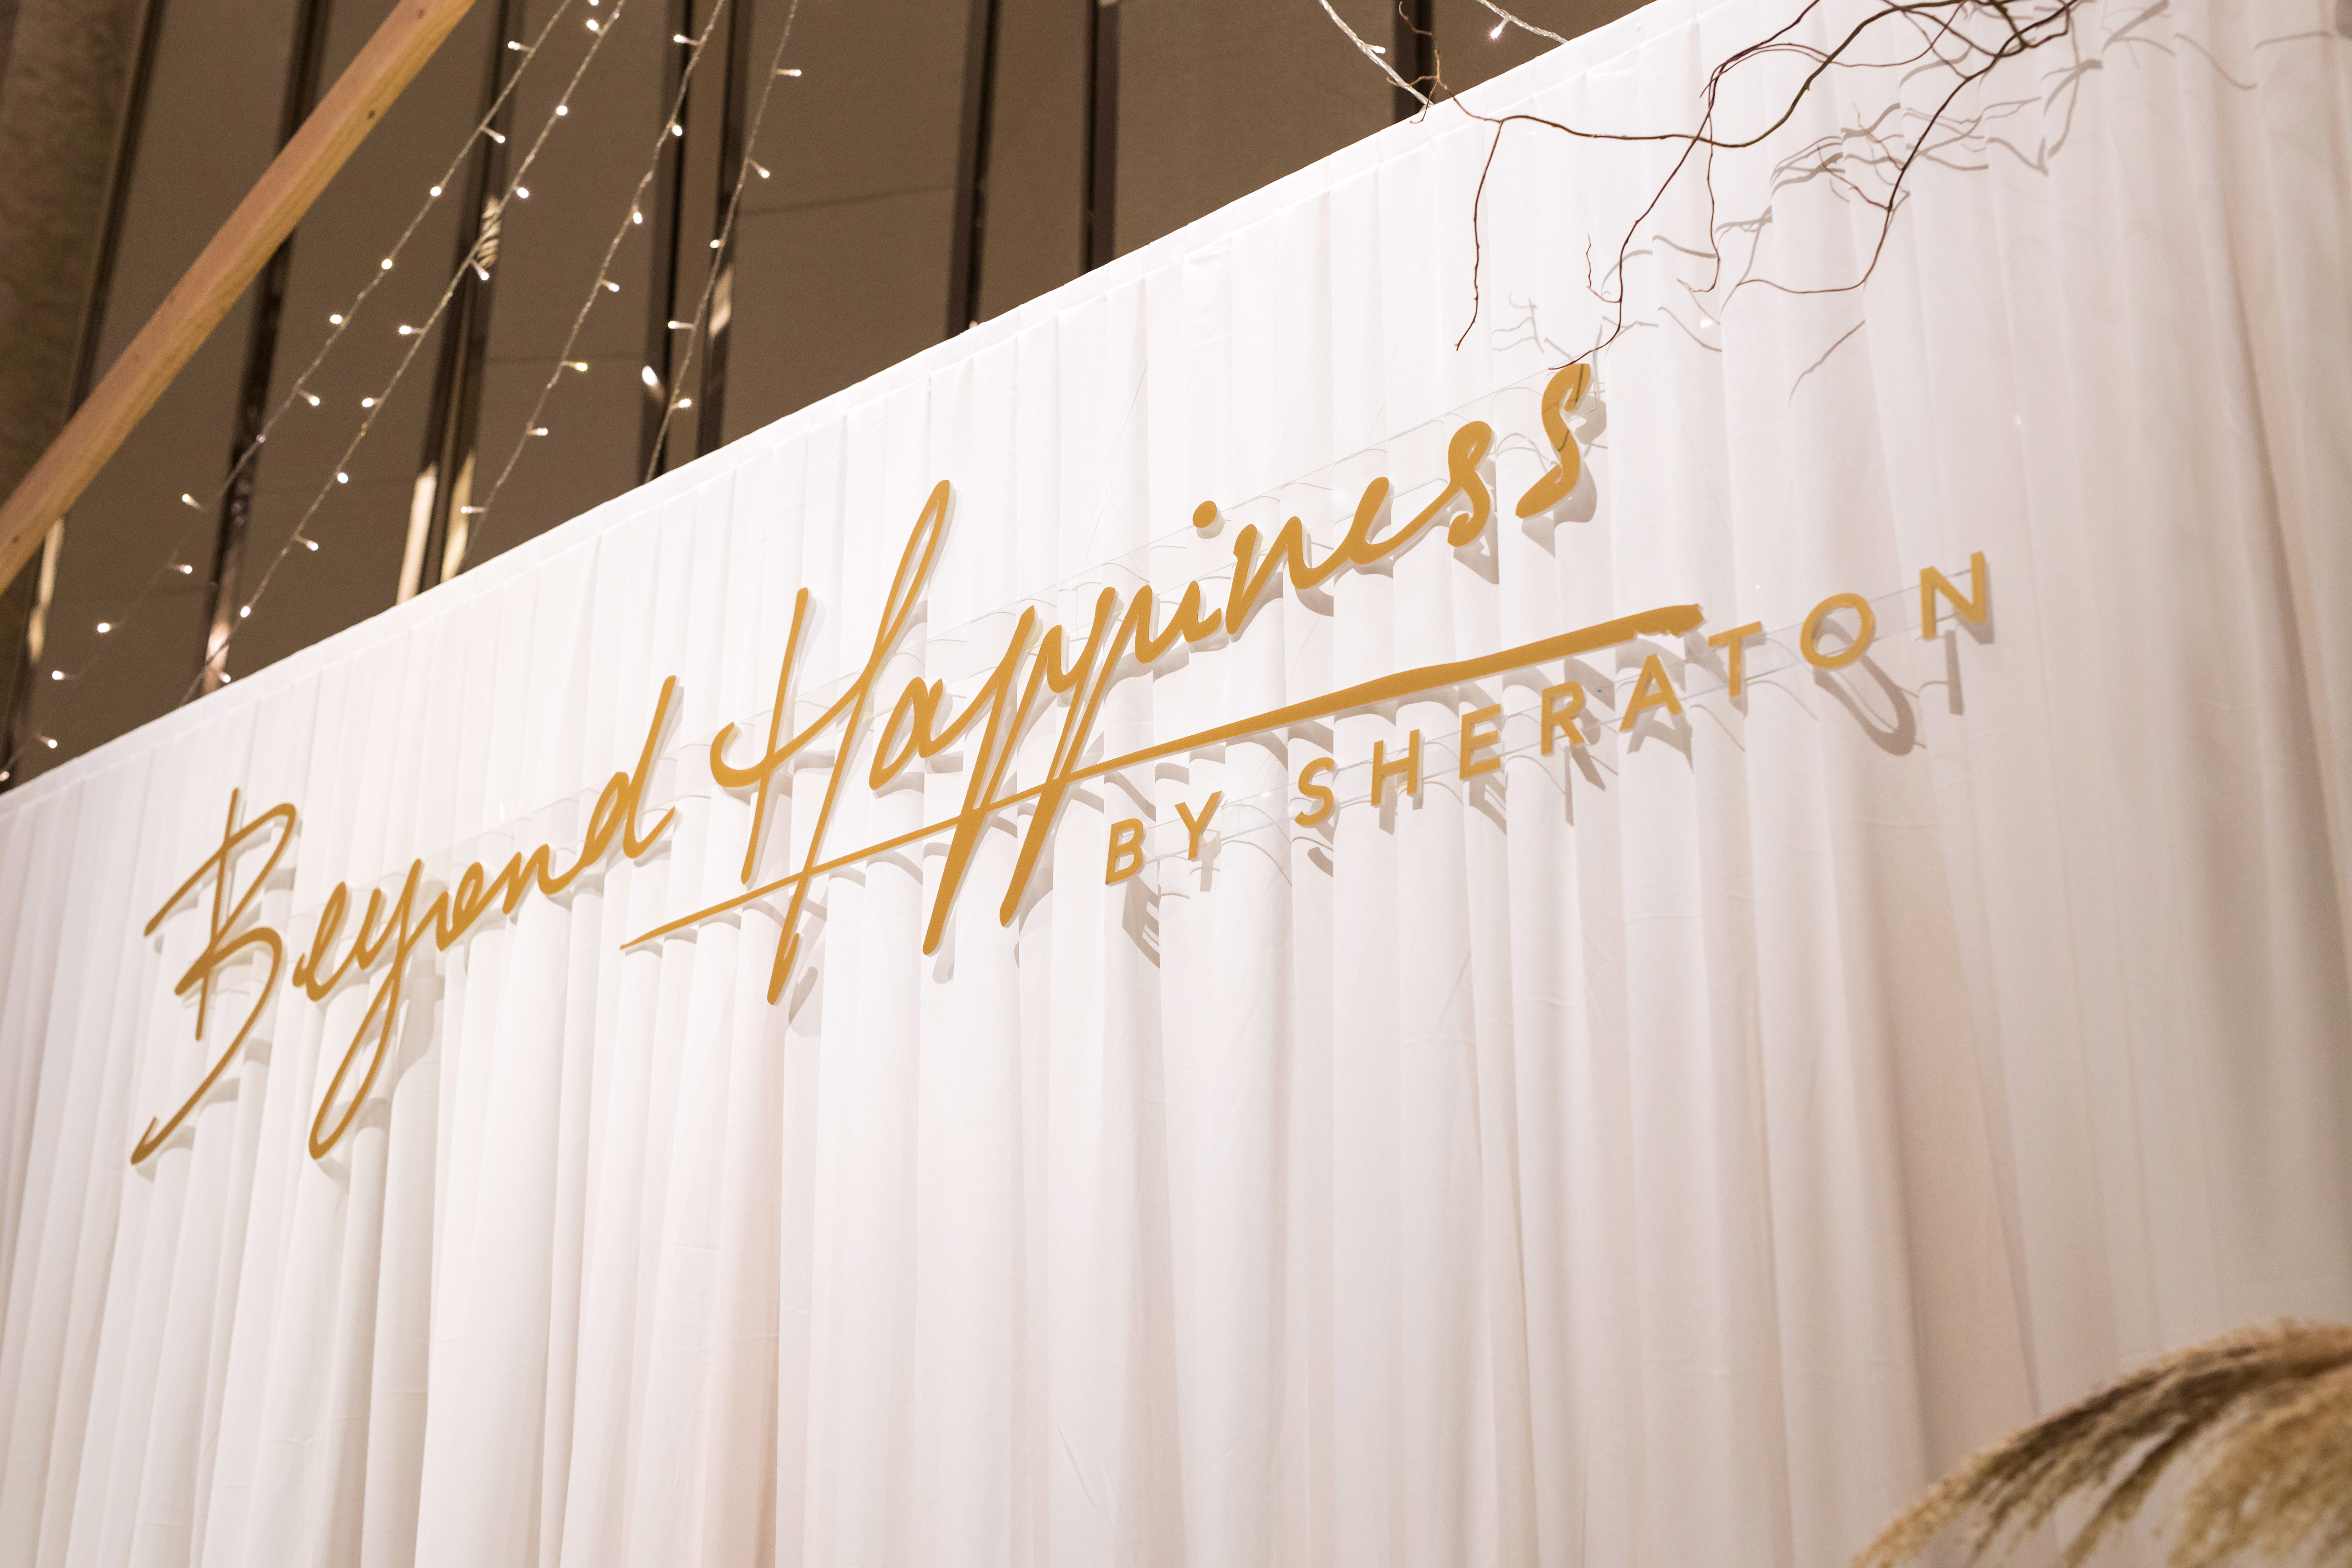 White curtain with Beyond Happiness by Sheraton written in gold letters